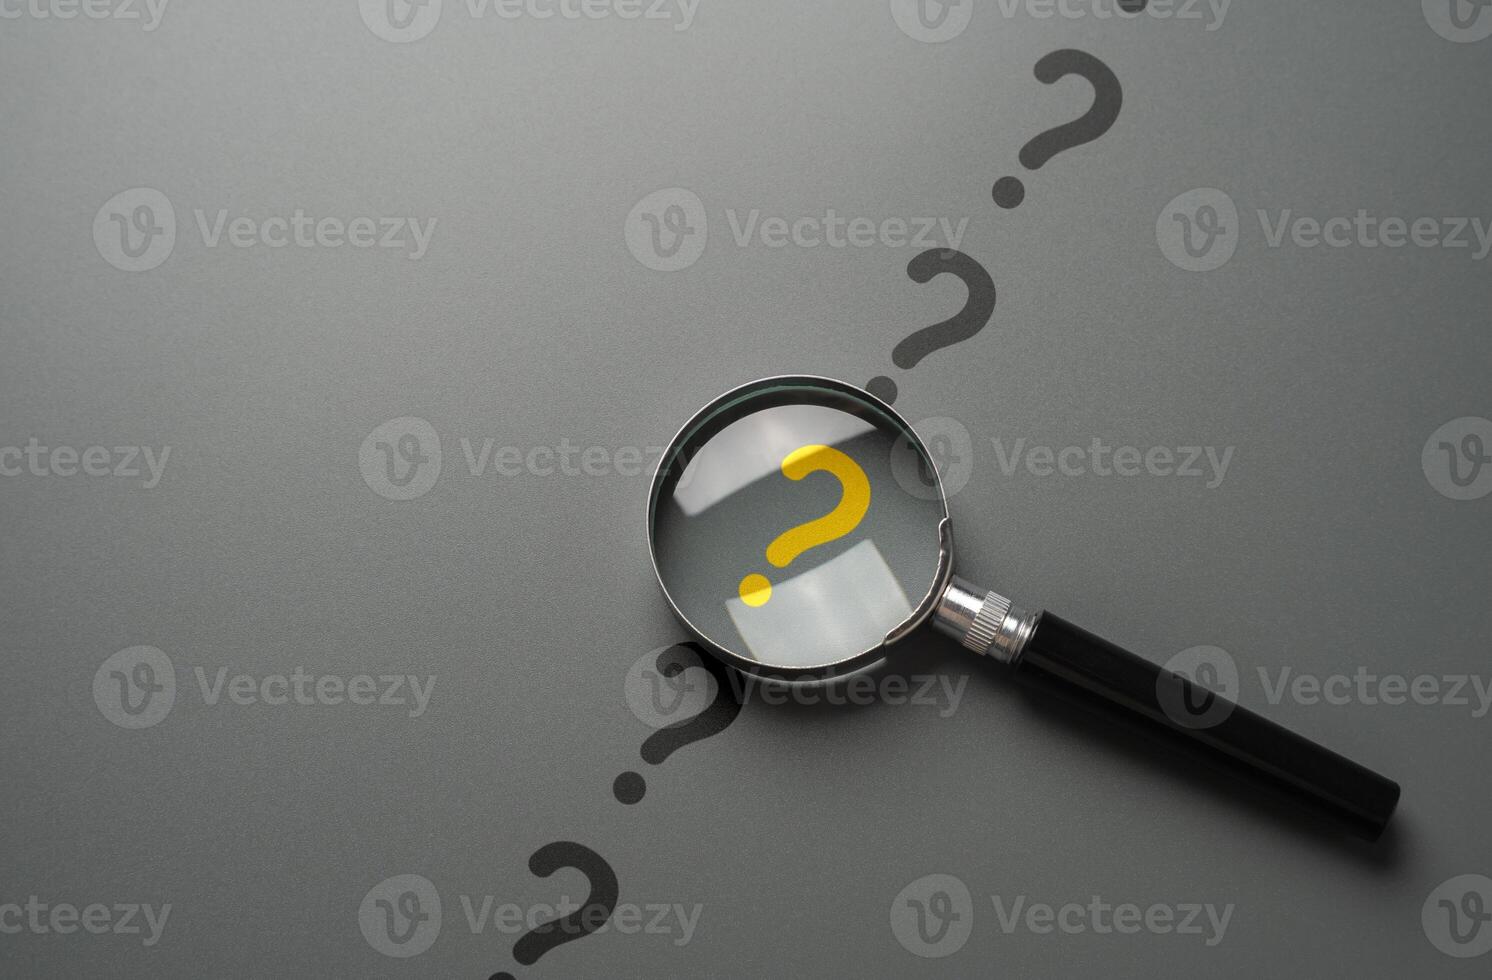 Magnifying glass and yellow question mark. FAQ. Solving mysteries, uncovering hidden truths. Curiosity, inquiry, uncertainty. Search for answers, clarity understanding. Quest for knowledge solutions photo